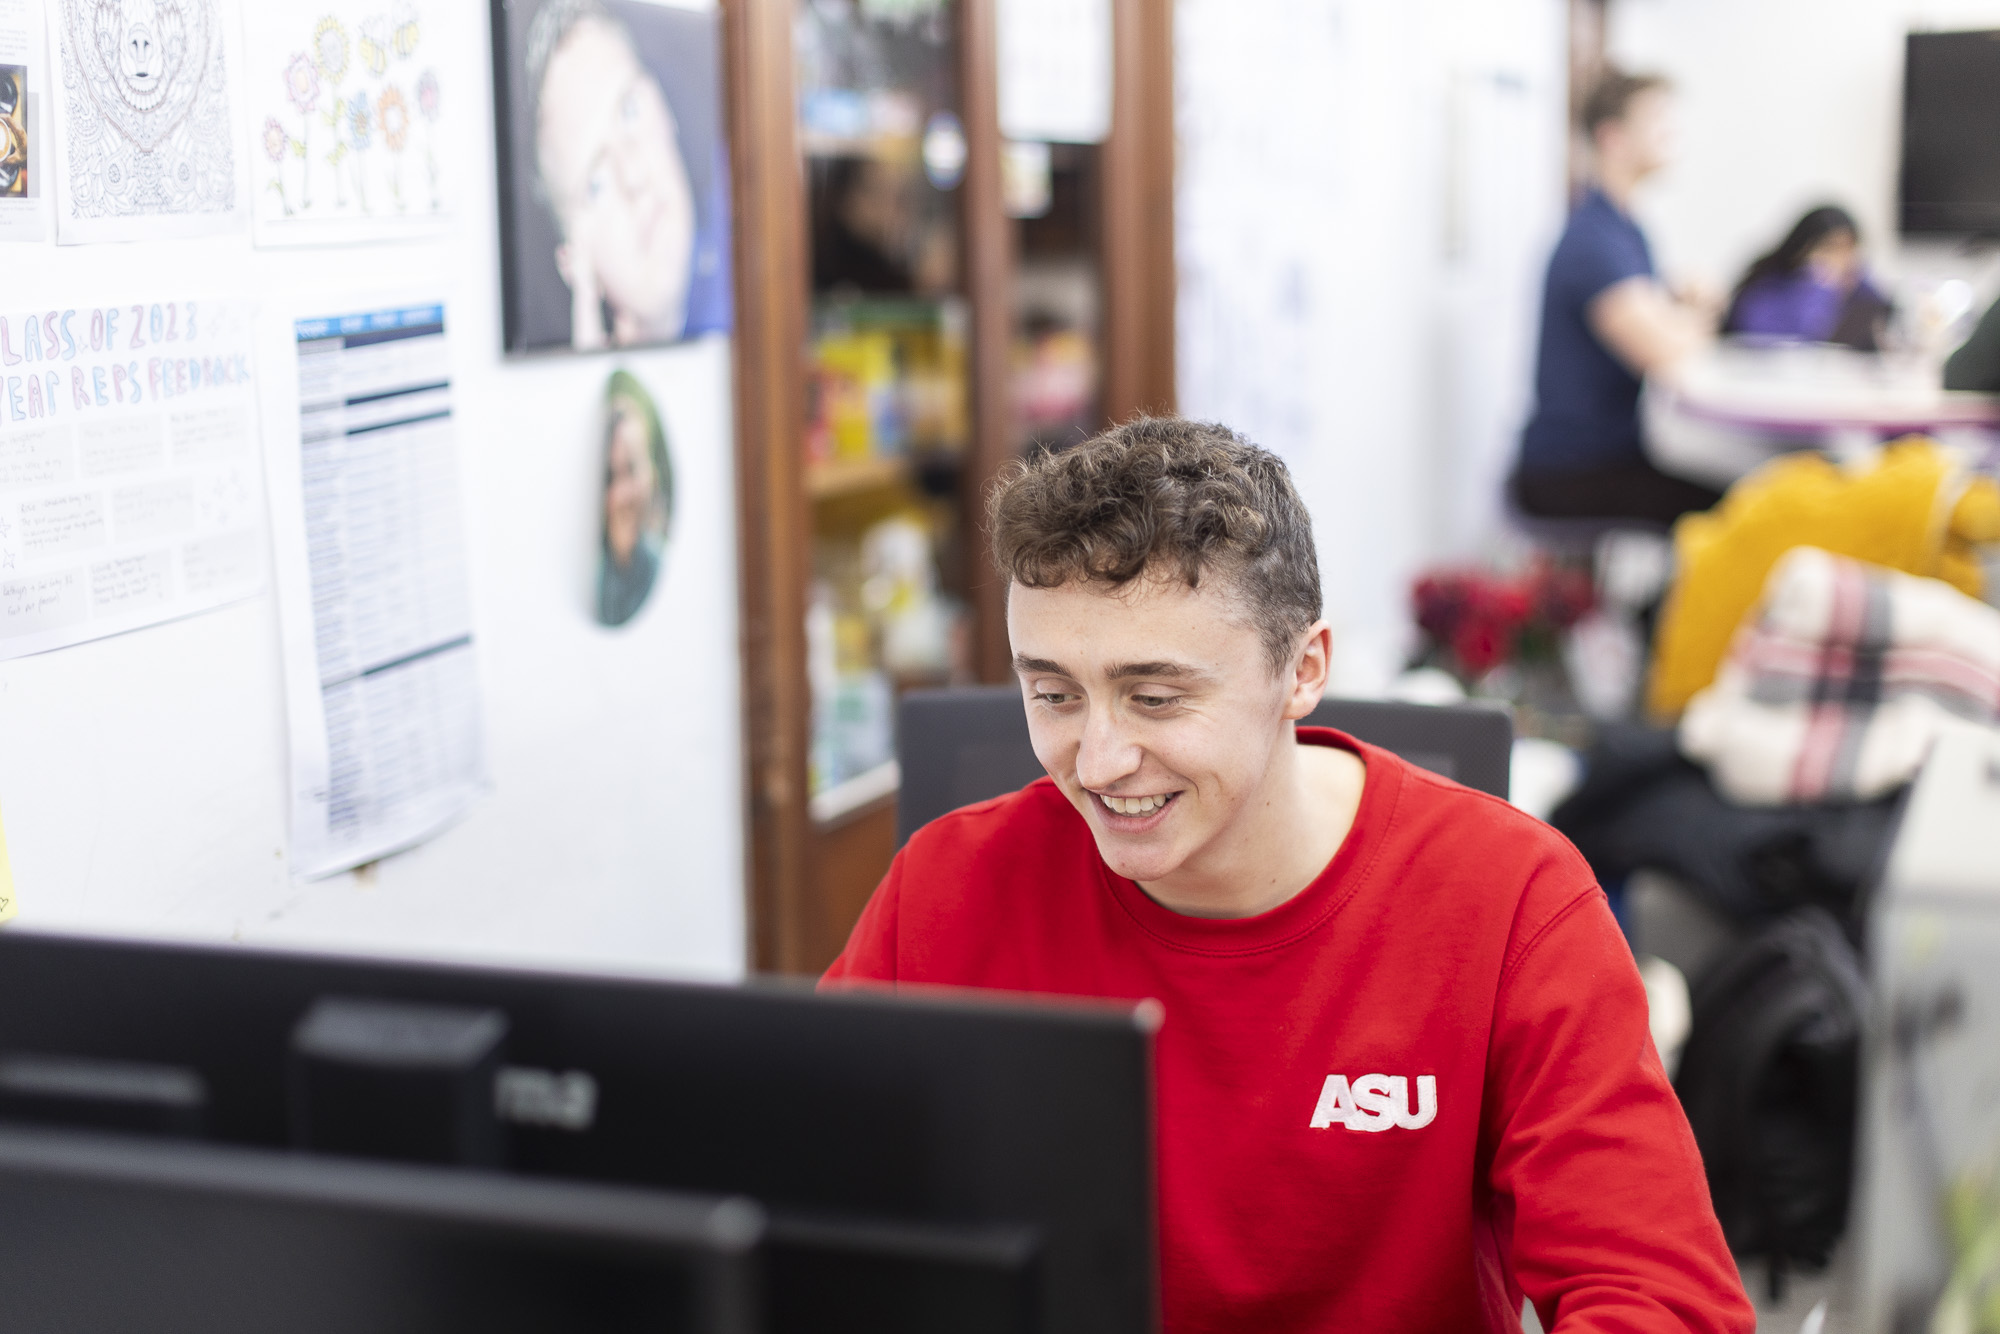 SU student wearing a red jumper using his computer